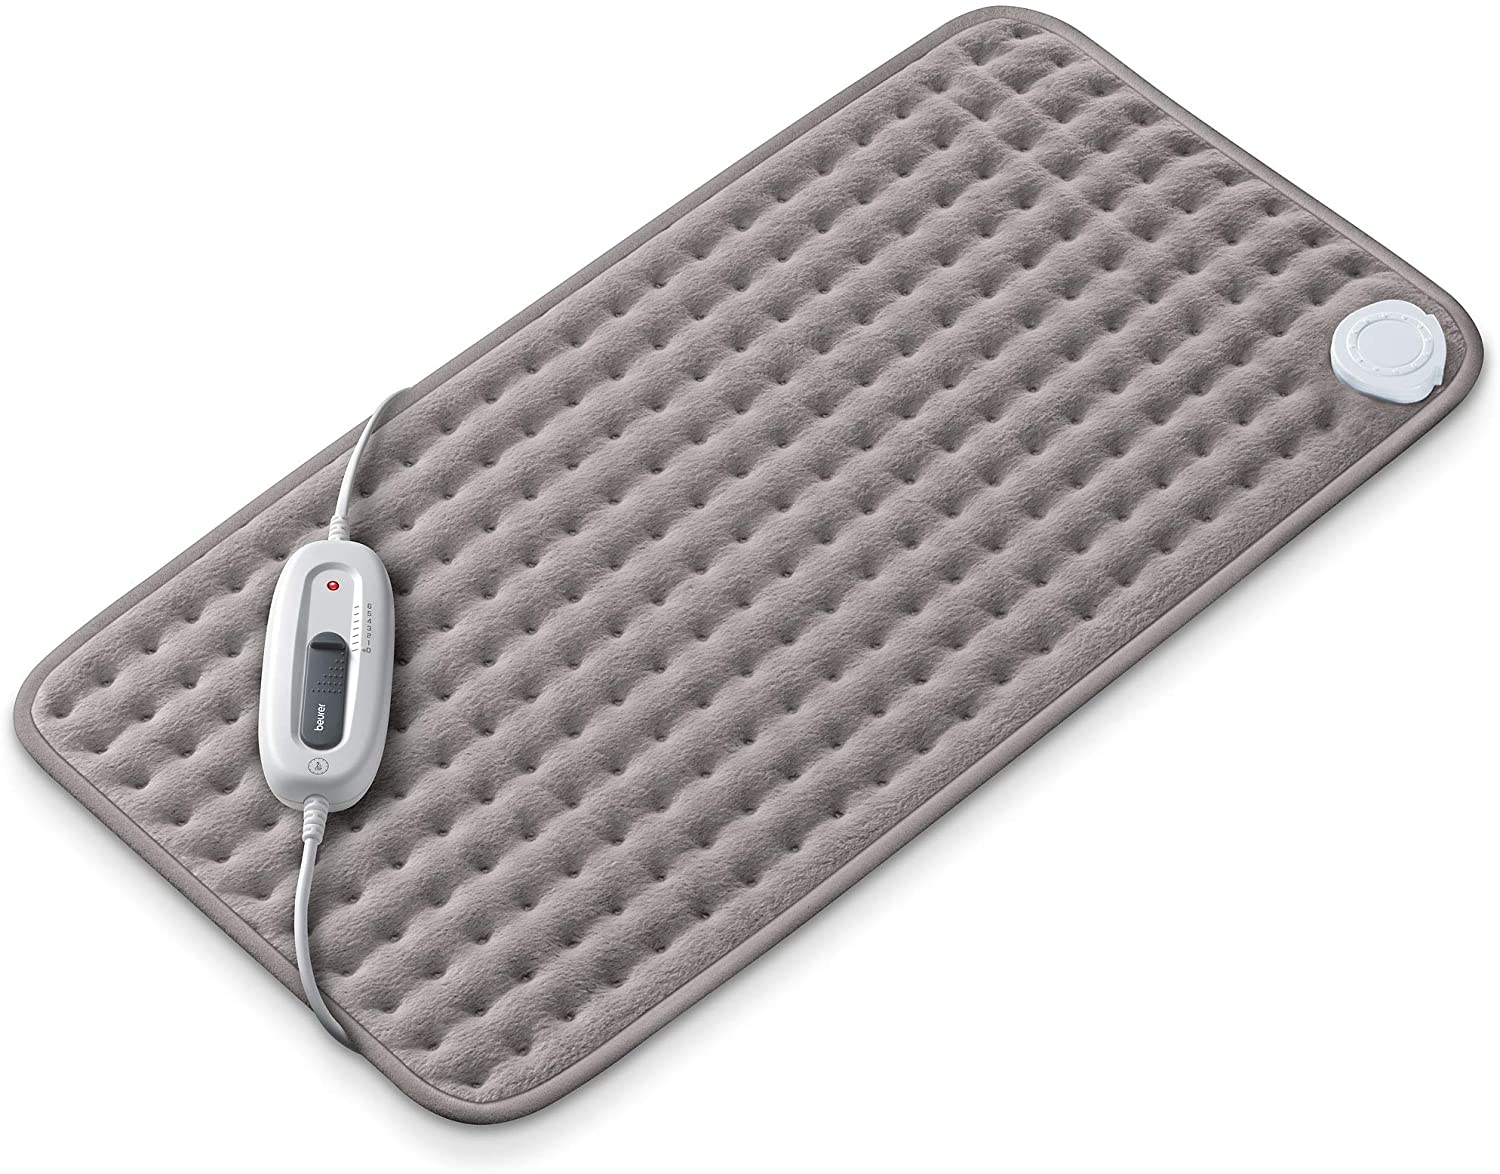 Review of Beurer Large ultra-soft heating pad